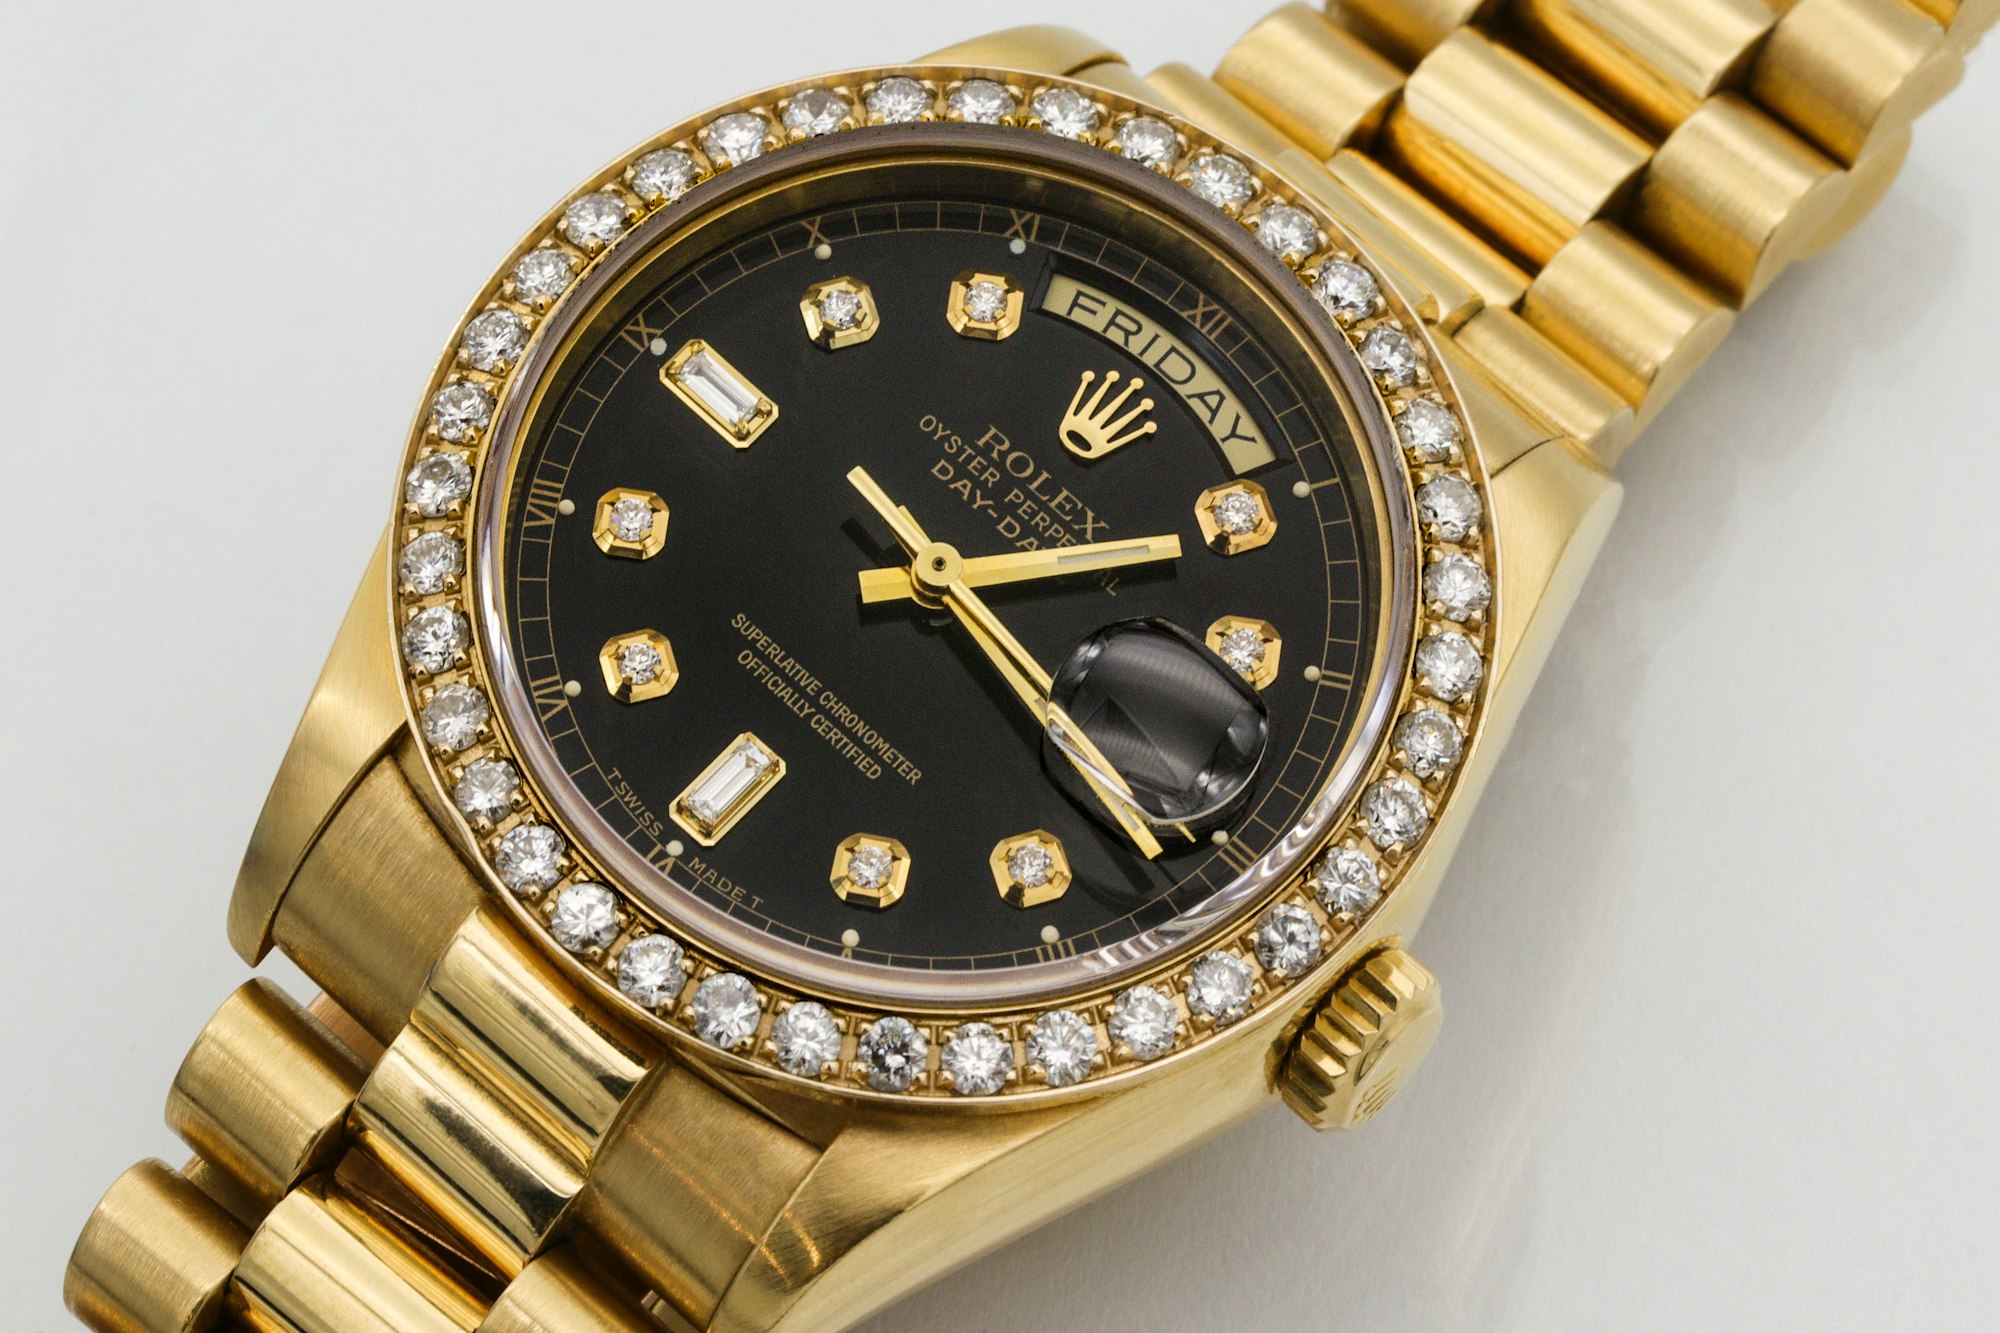 Mens 18K yellow gold president date/just Rolex with diamond bezel and diamond markers on black dial. 